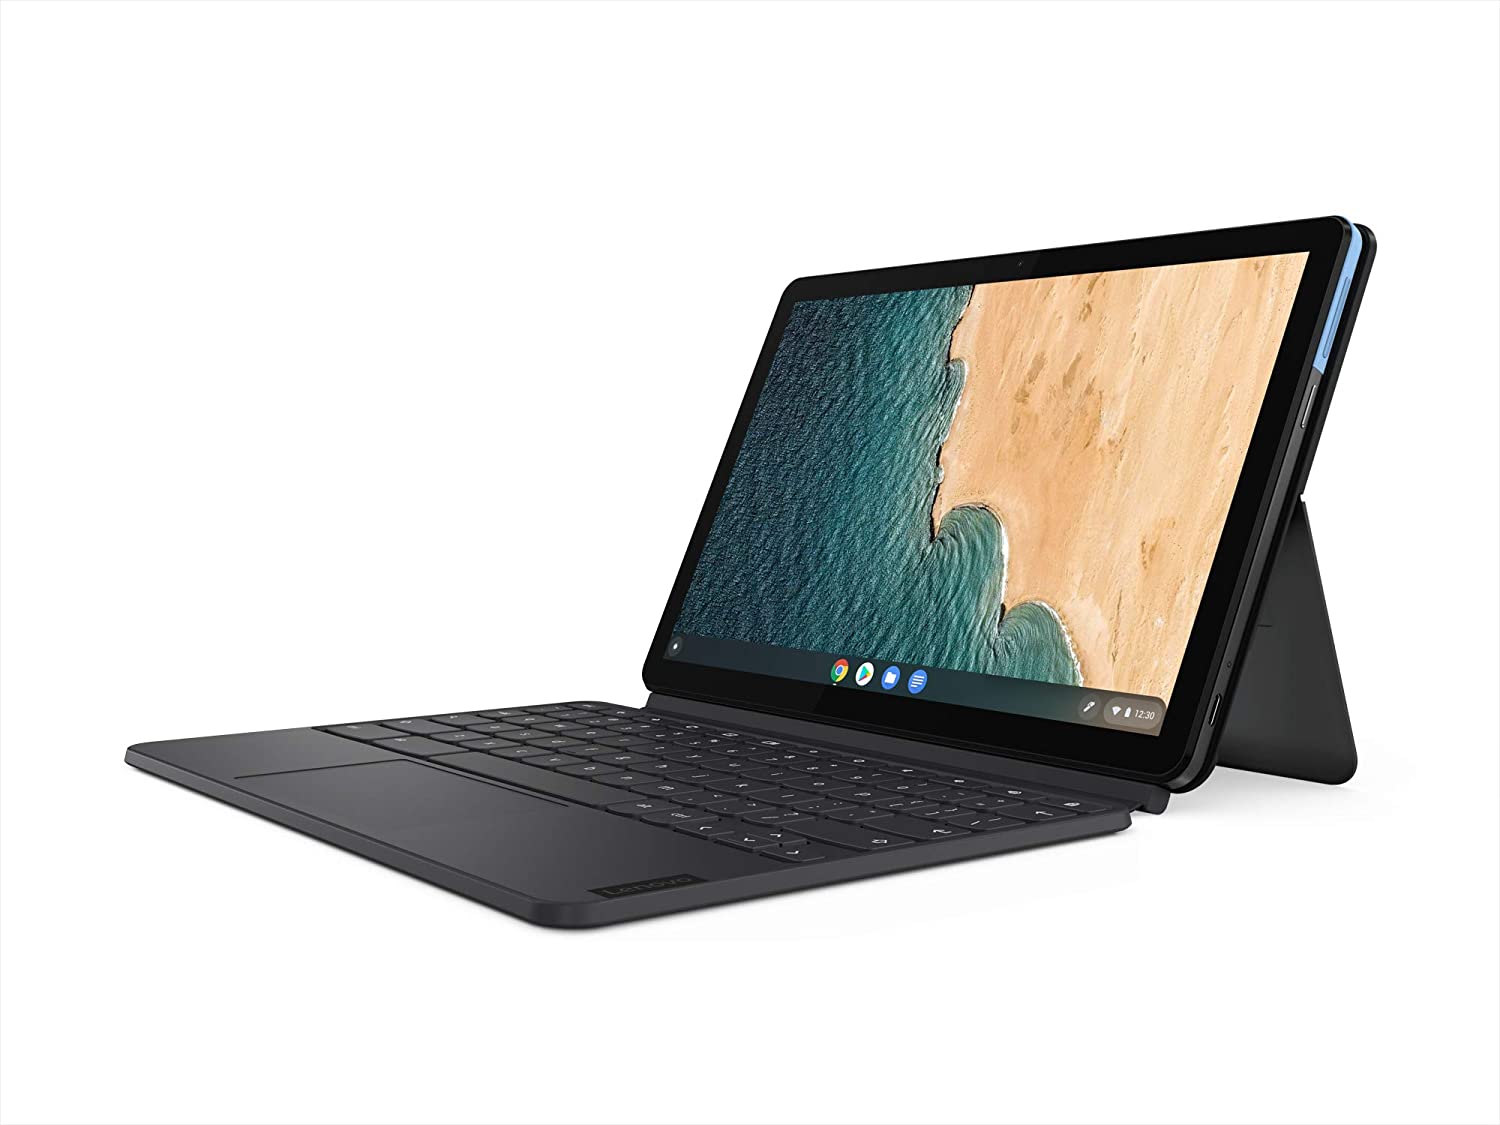 Lenovo Chromebook Duet available at $40 discount on Amazon